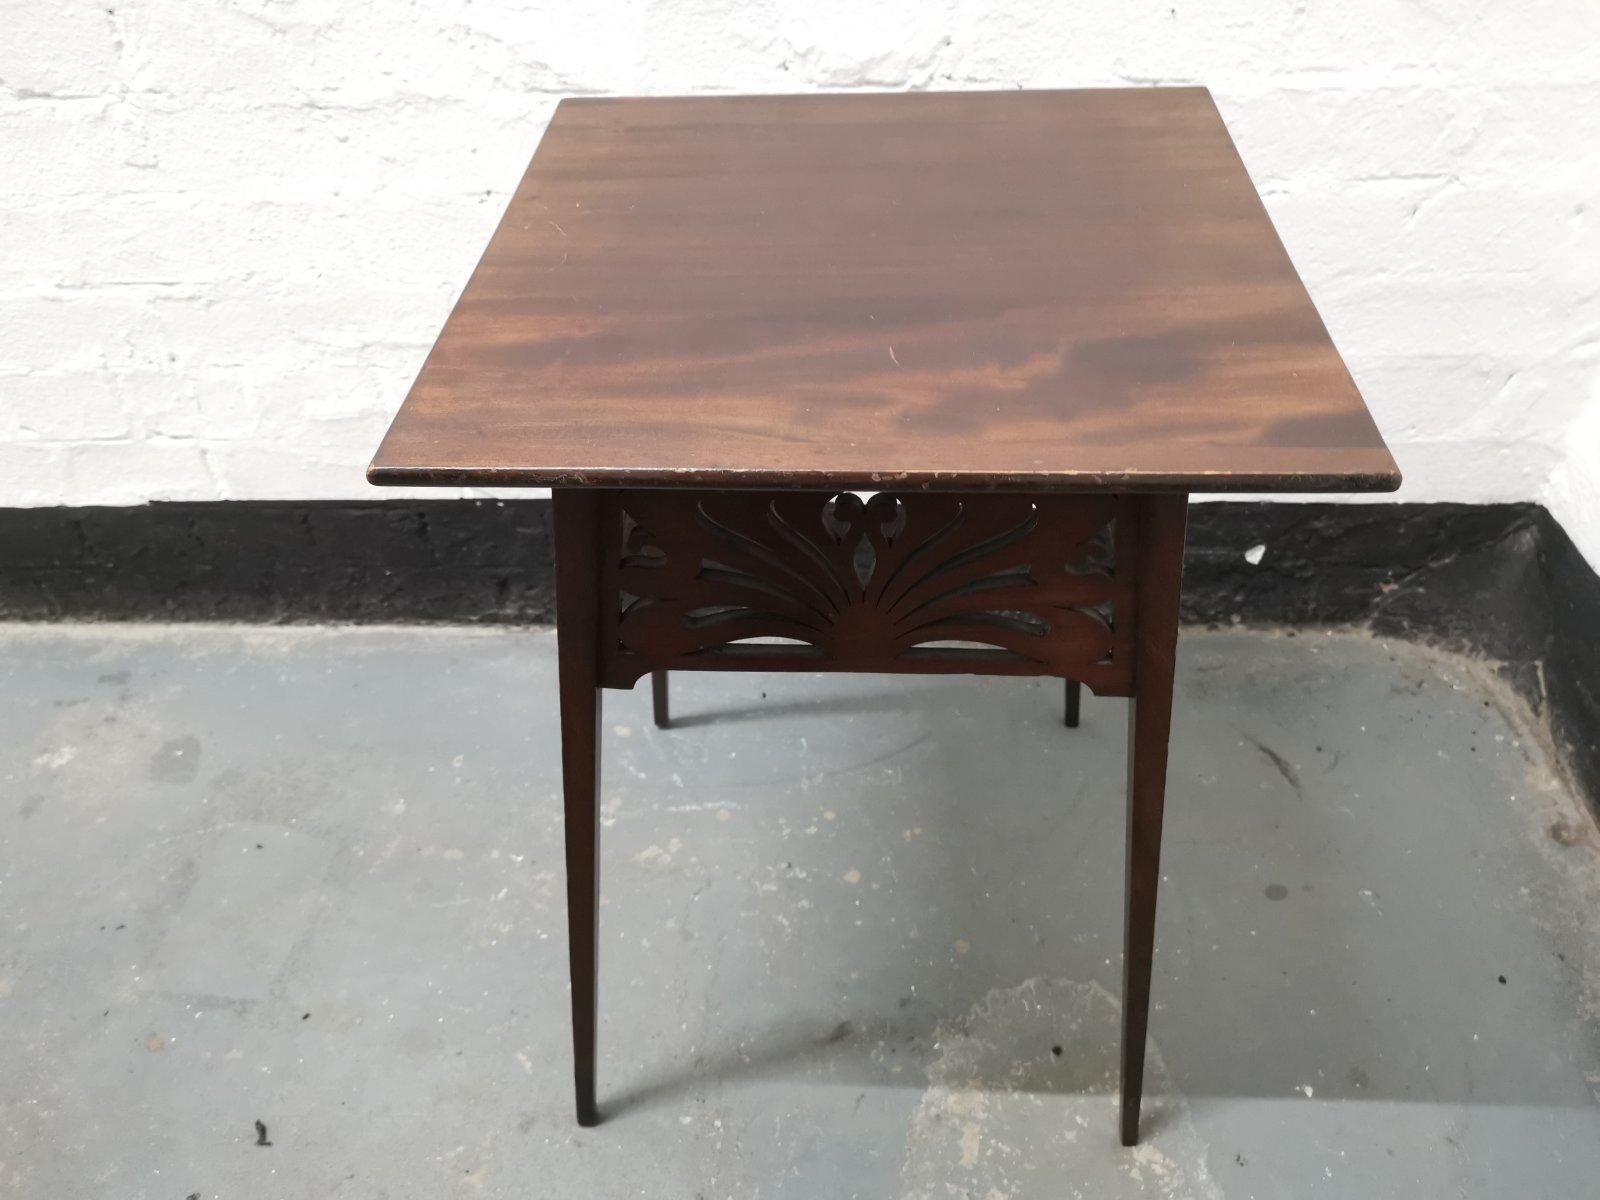 Liberty & Co, in the style of A H Mackmurdo.
An Art Nouveau Mahogany side table with four organic fretwork panels on fine tapering legs.
The last two images show a variation of this table from the Liberty 1895 Yuletide catalog with different